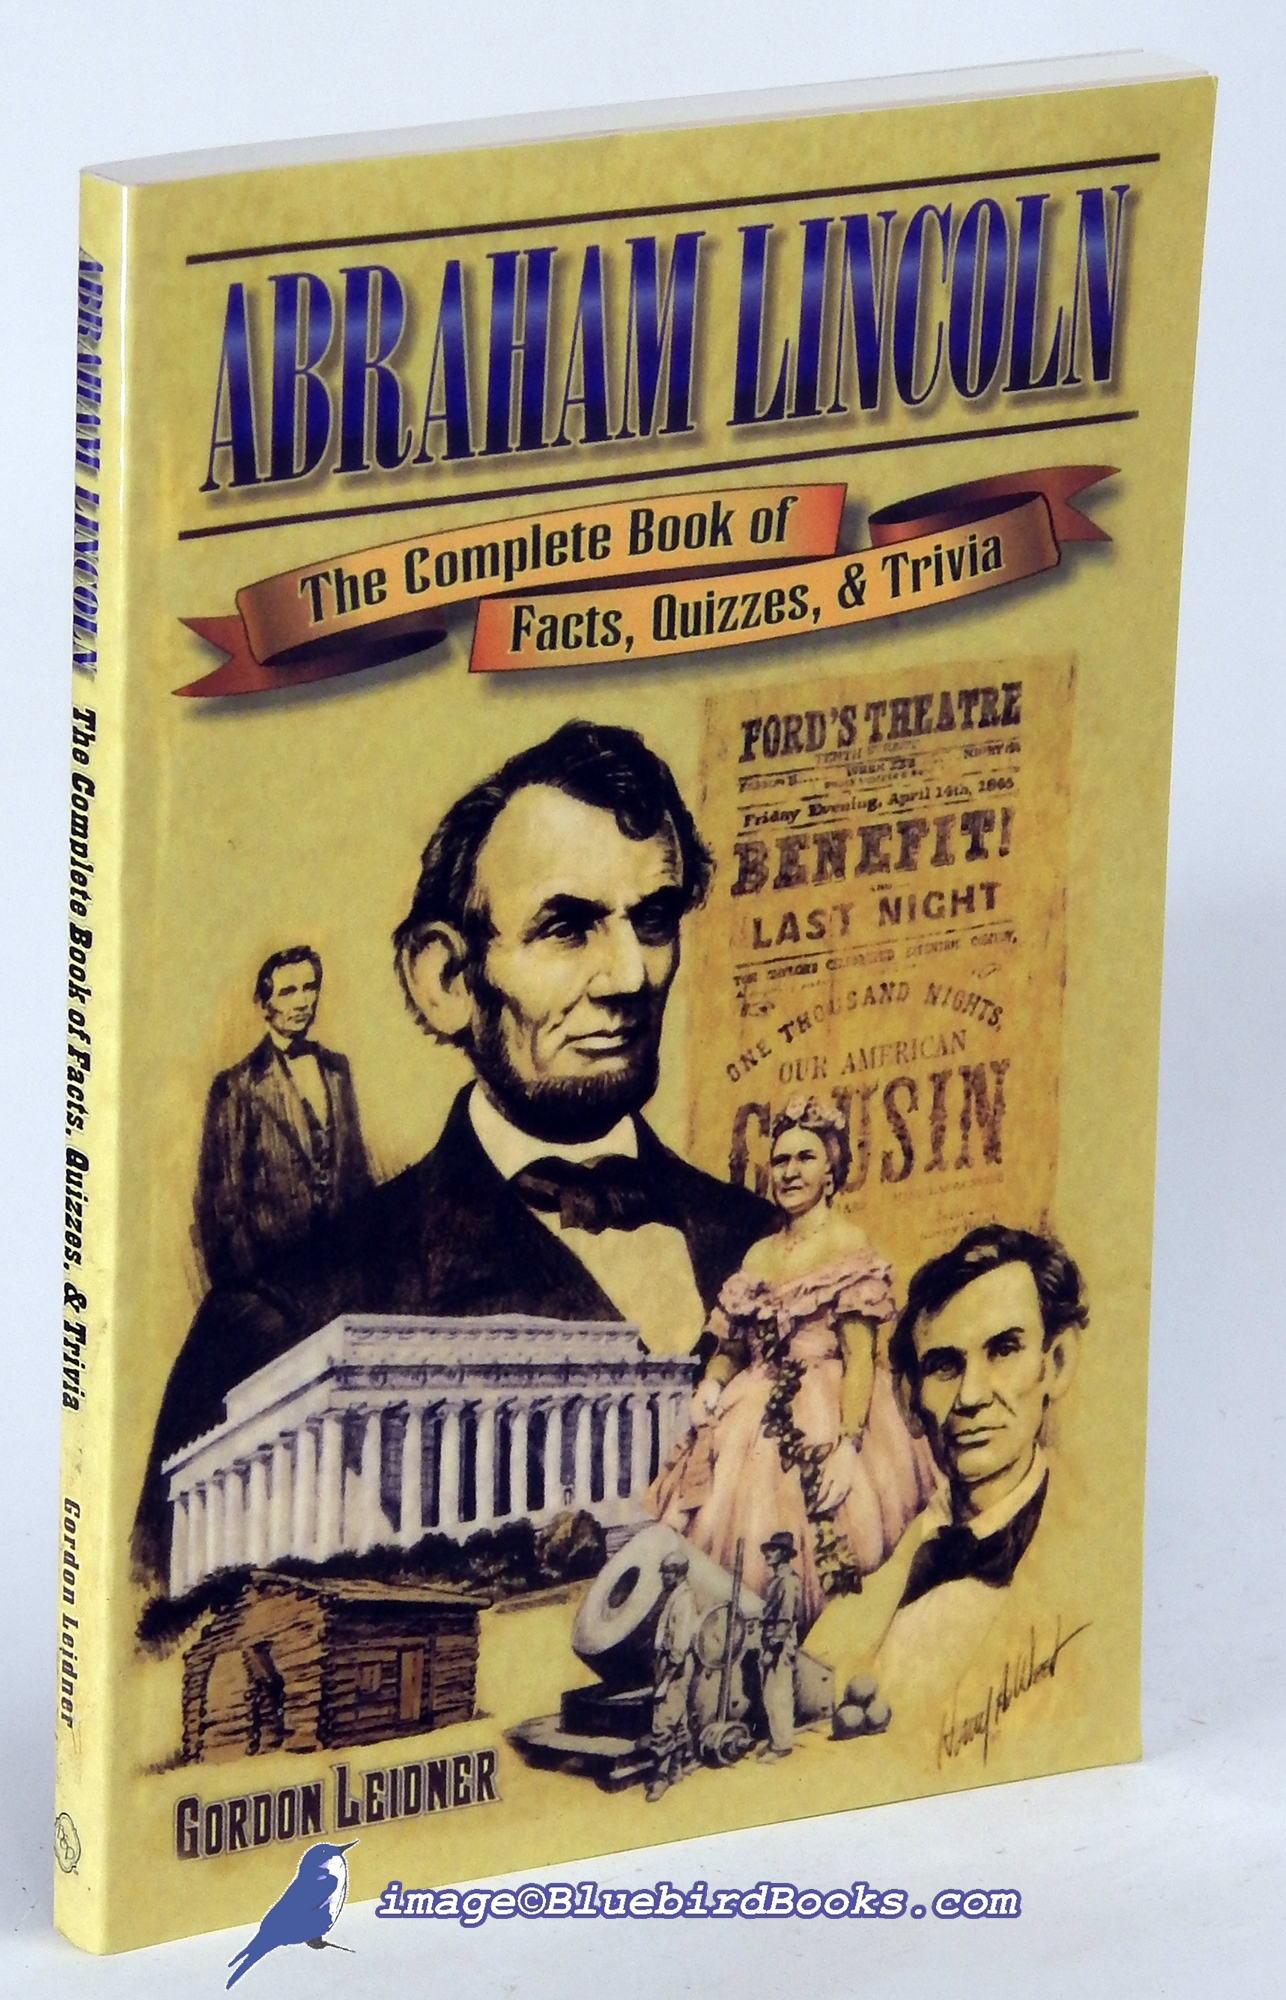 LEIDNER, GORDON - Abraham Lincoln: The Complete Book of Facts, Quizzes and Trivia